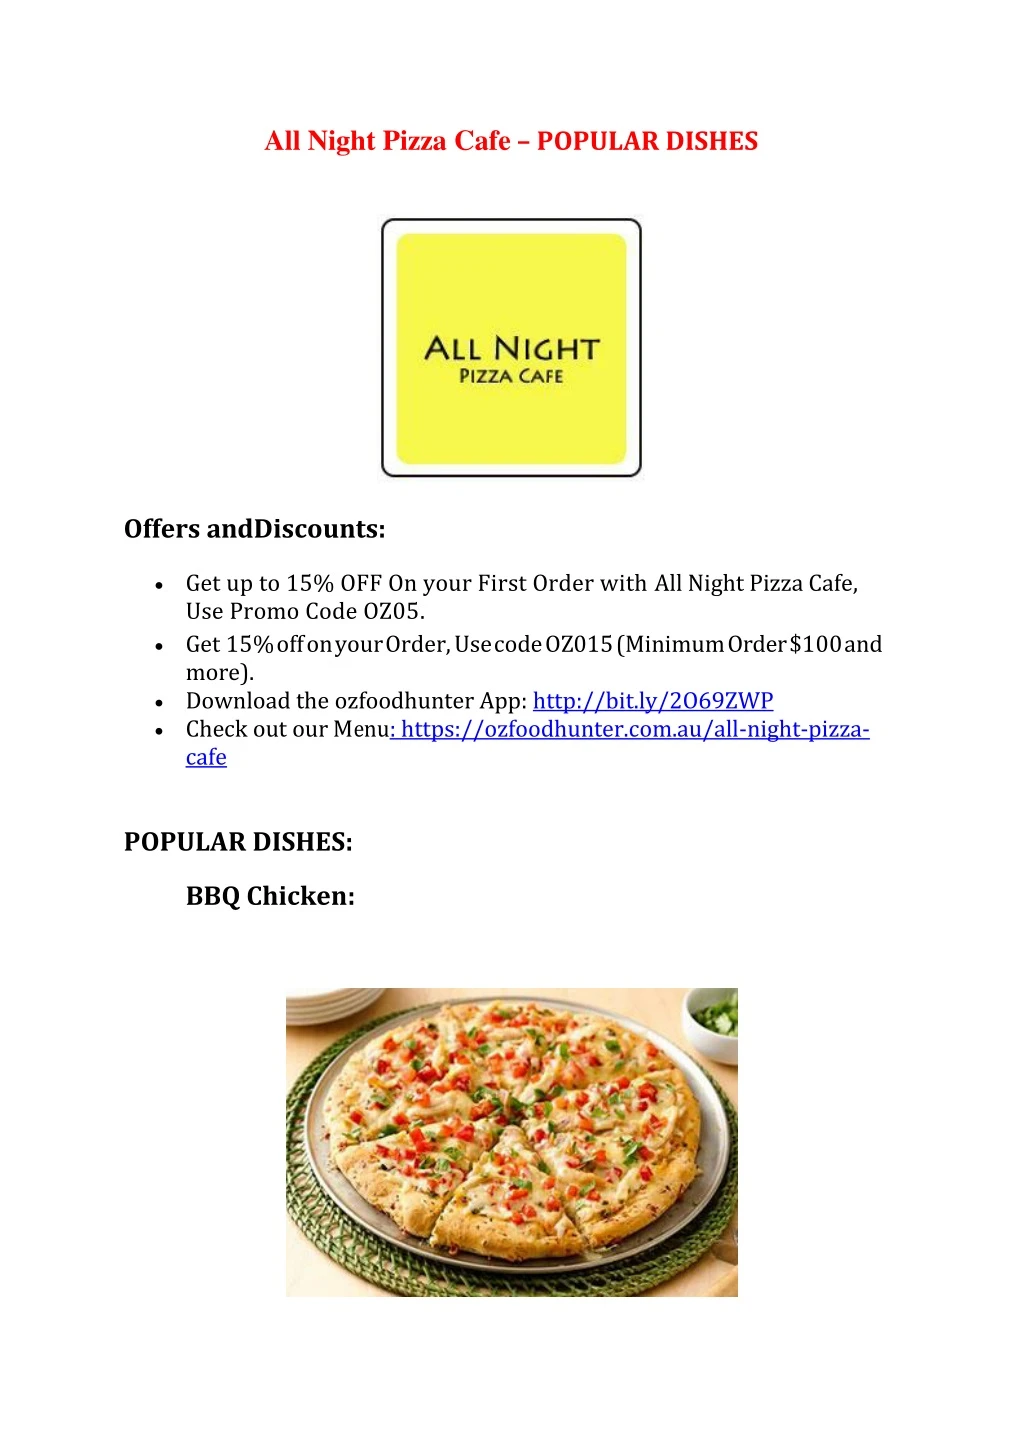 all night pizza cafe popular dishes